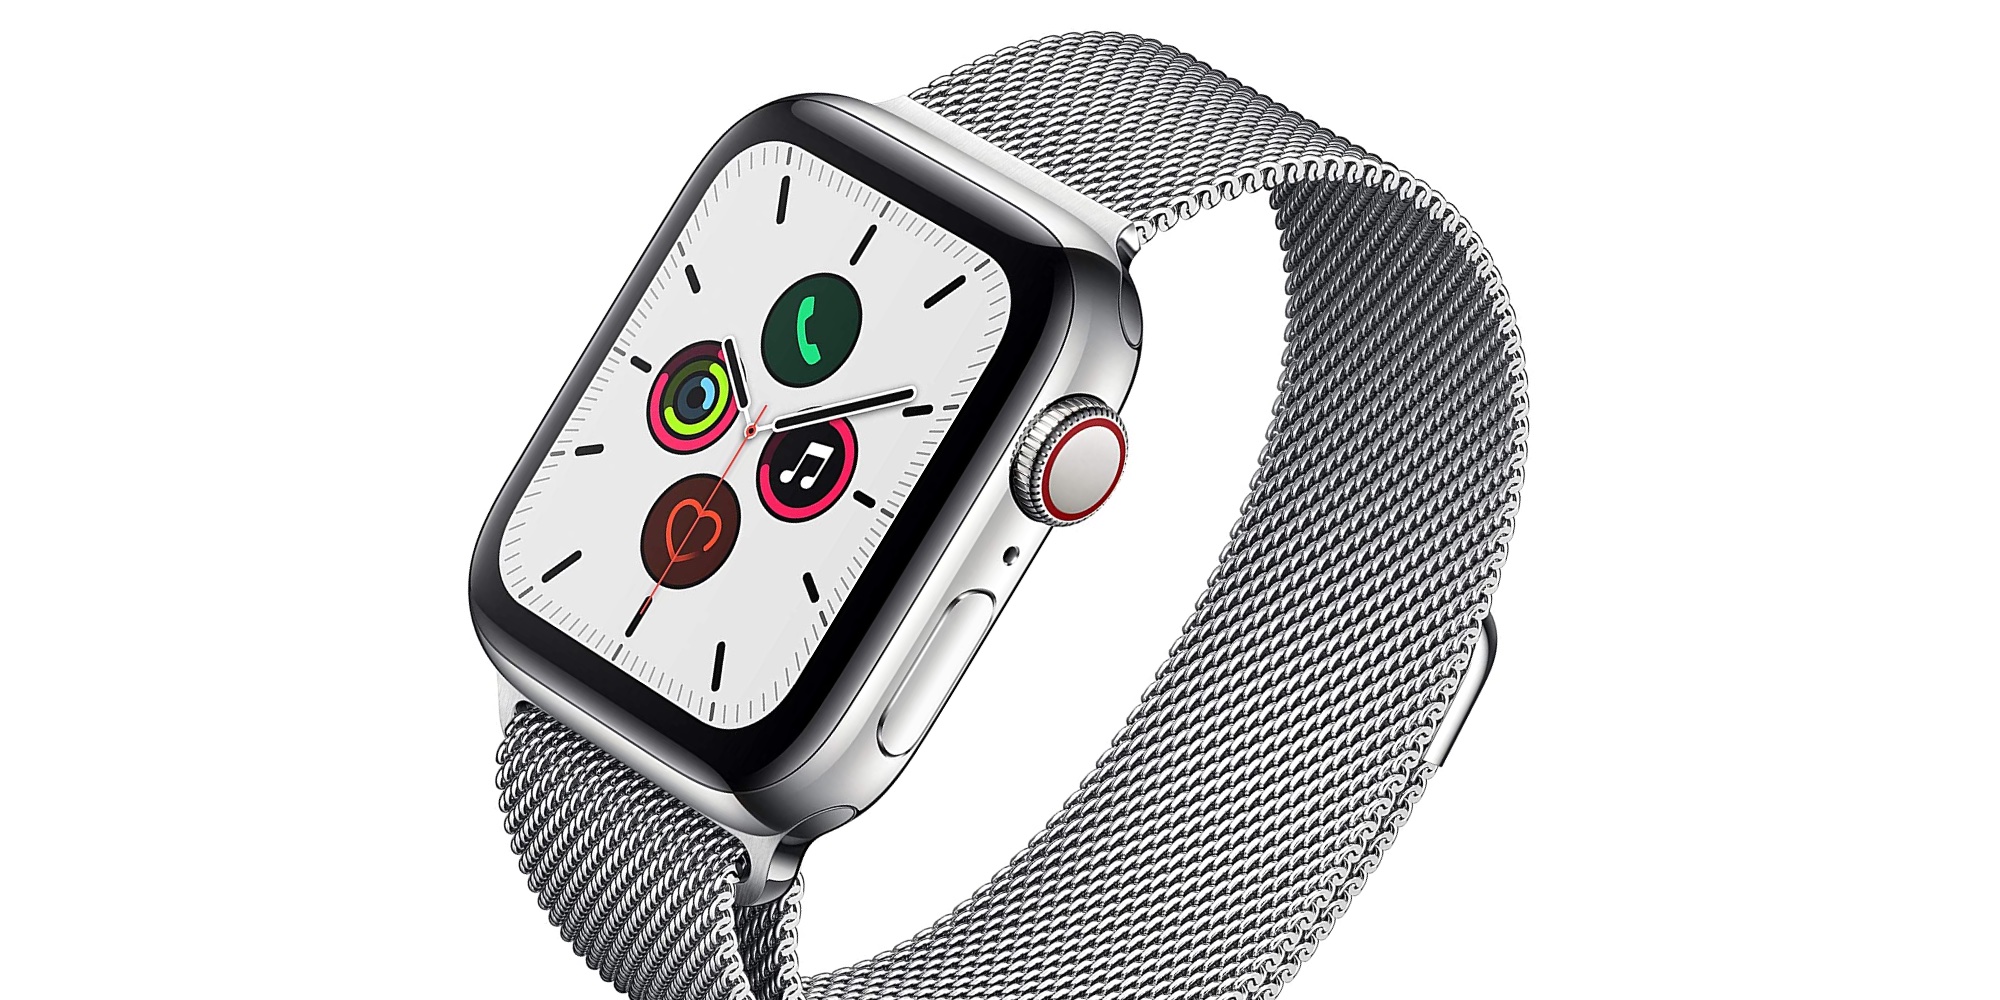 Score a deep $360 discount on a stainless steel Apple Watch Series 5 at a  new all-time low